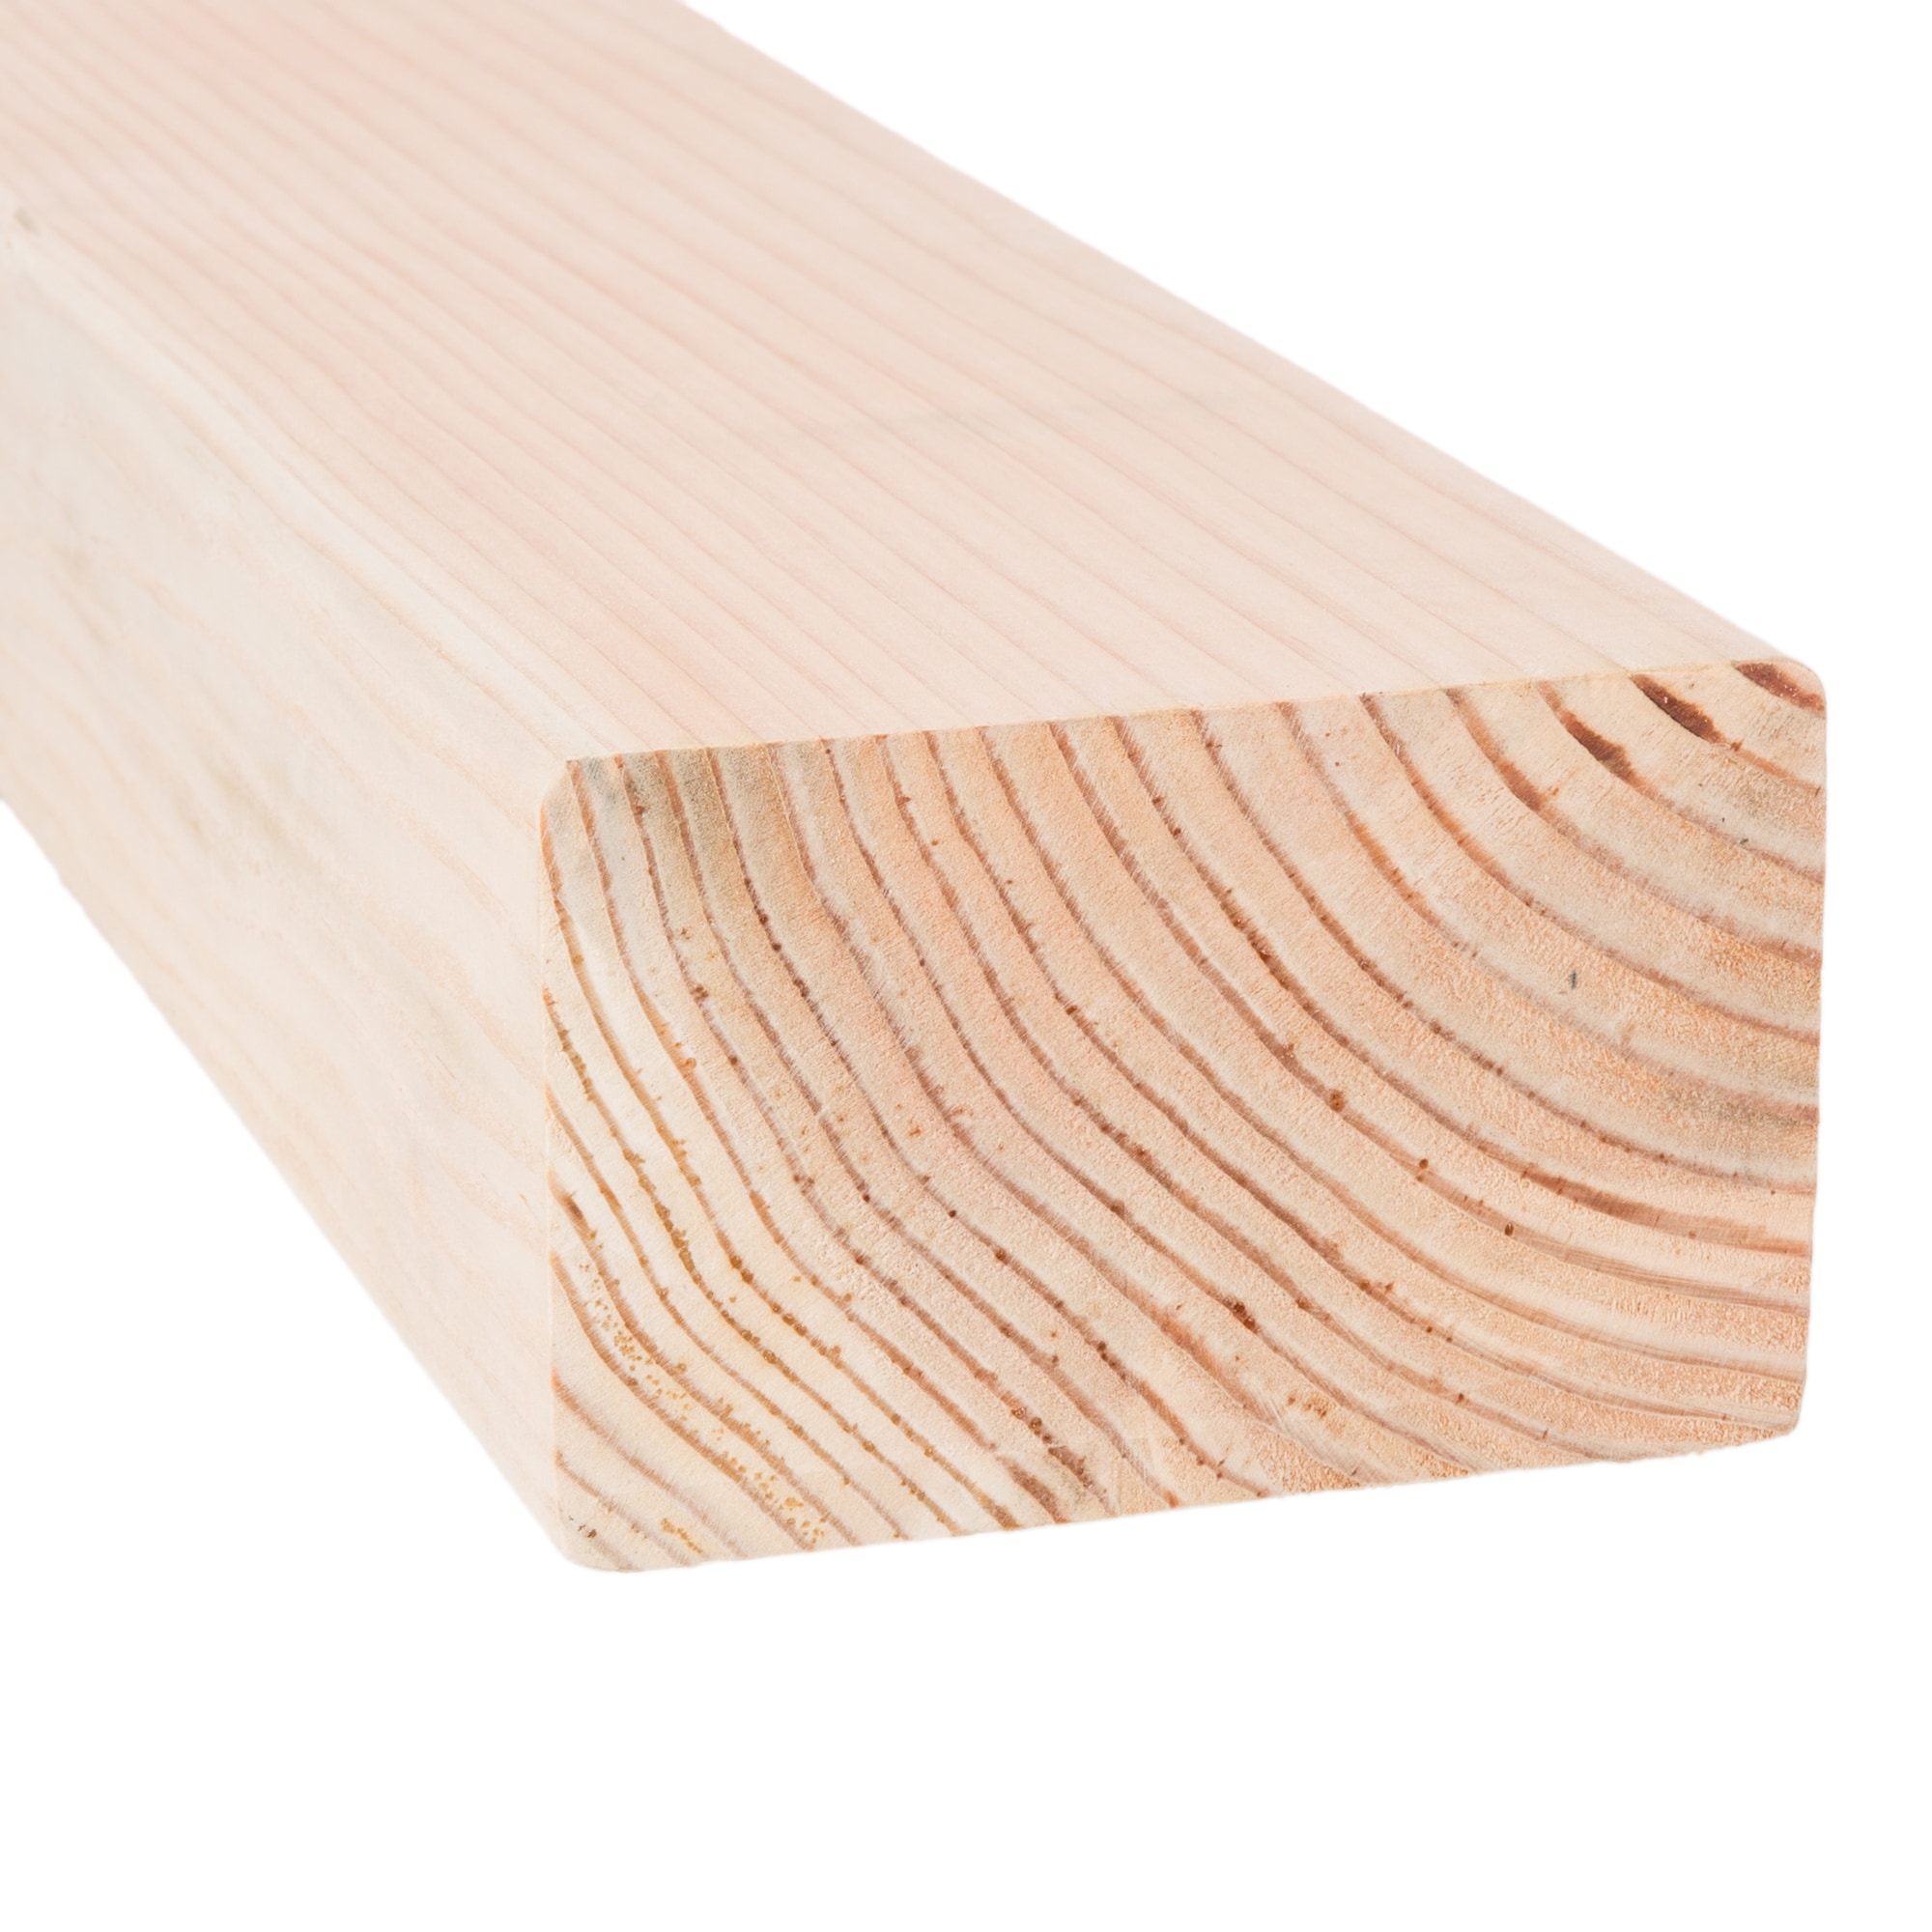 4 In X 6 In X 8 Ft Prime 2 And Better Douglas Fir Lumber 0405438 - Vrogue